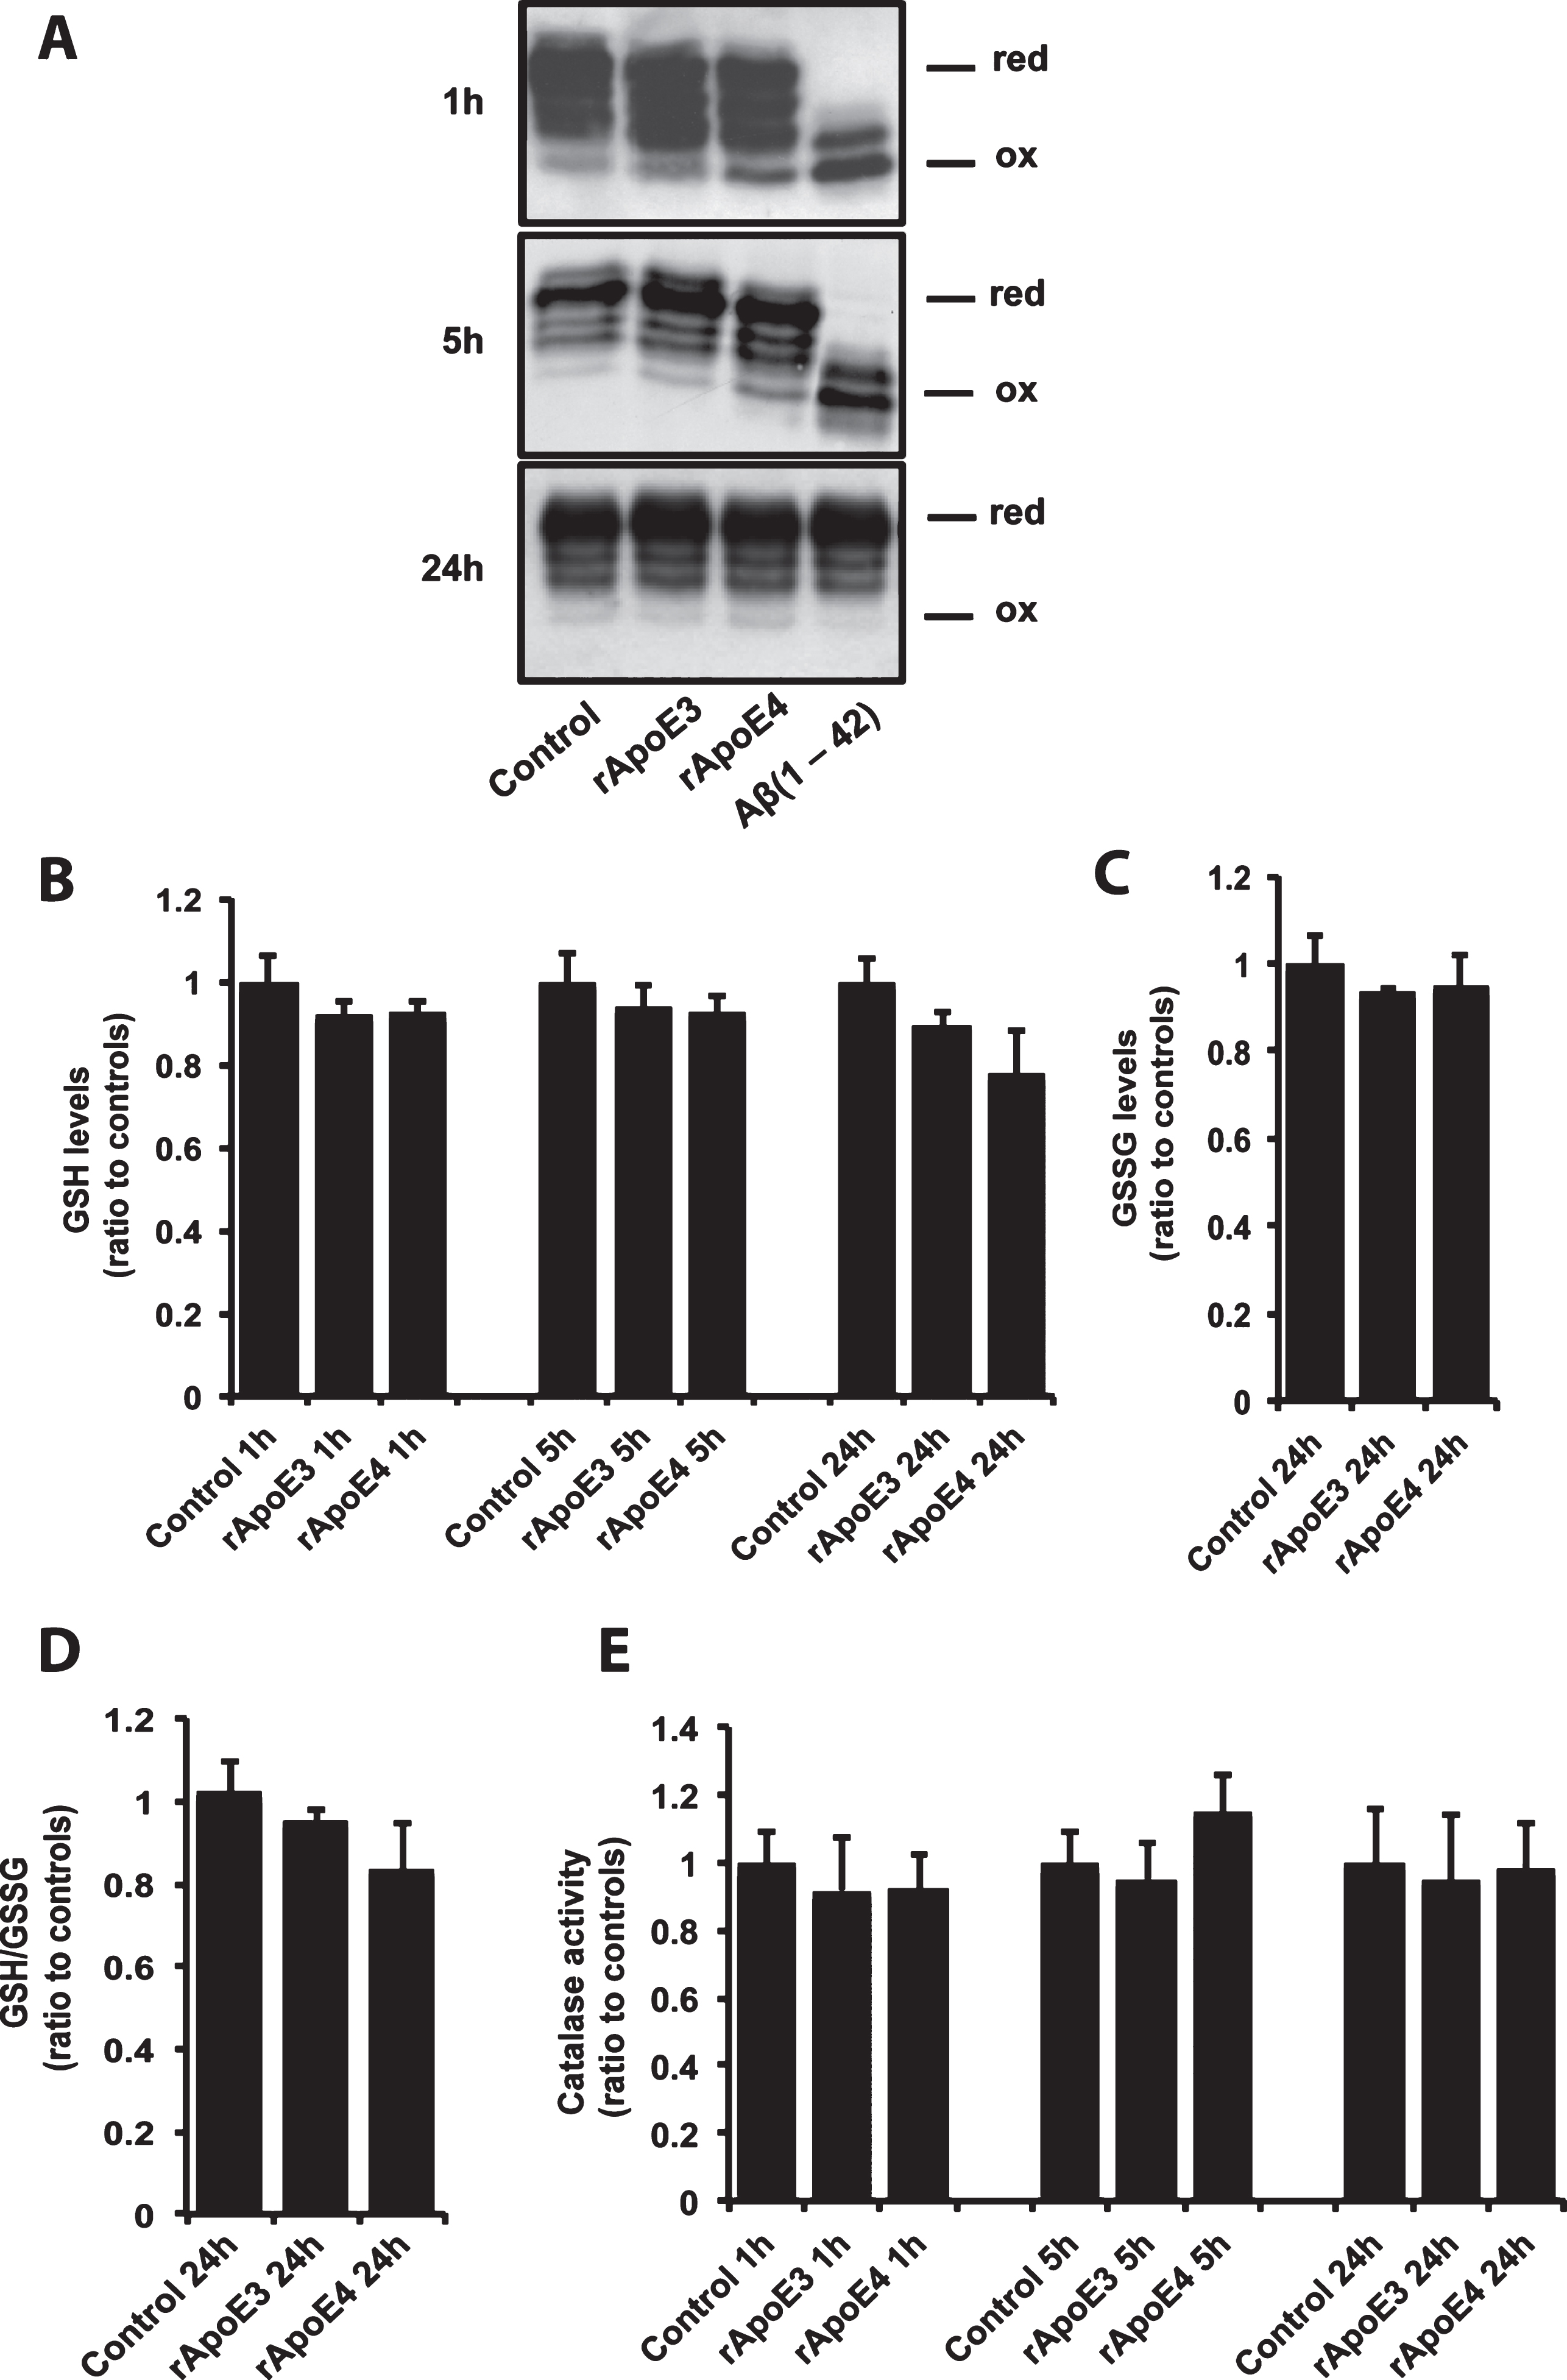 ApoE4 induces minor oxidative stress effects in SH-SY5Y cells. A) Trx1 redox status assessment using AMS gel shift assay. The pictures show representative images of four repeated experiments. Effects of rApoE on GSH levels (B) and on catalase activity (C). Bars represent mean values±S.E.M of six experiments and are presented as percentage of values for control cells at each time point (**p < 0.01; one-way ANOVA, Fisher’s PLSD post hoc test).